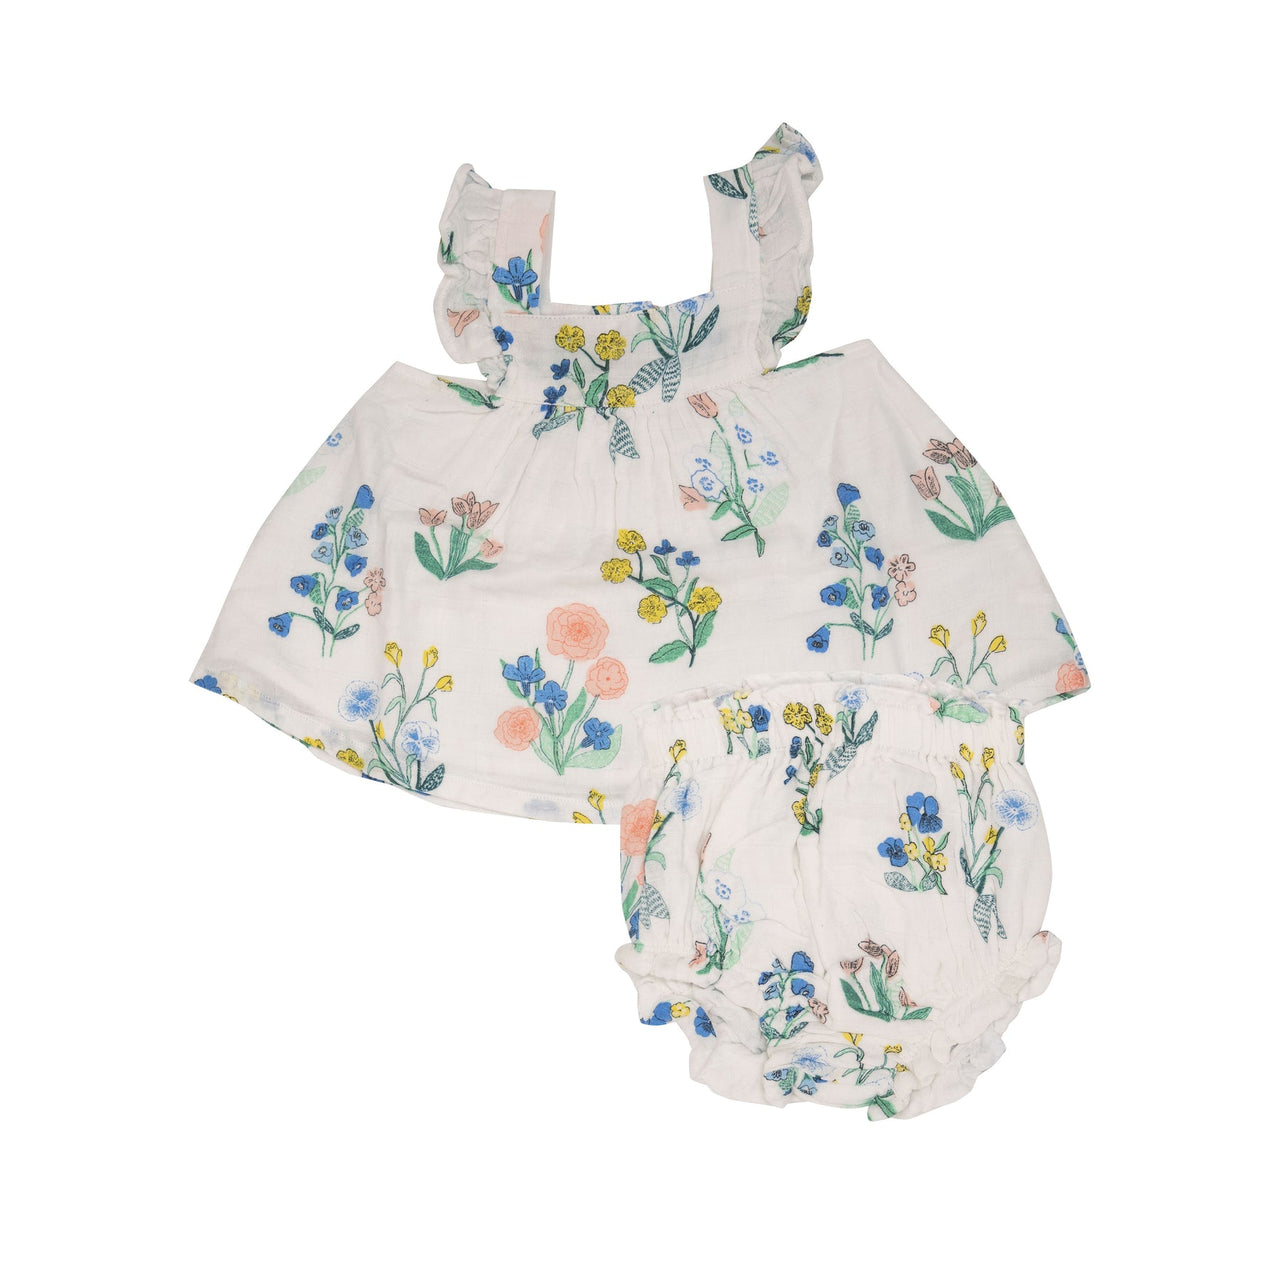 Butterfly Sleeve Pinafore Top & Diaper Cover - Urban Floral